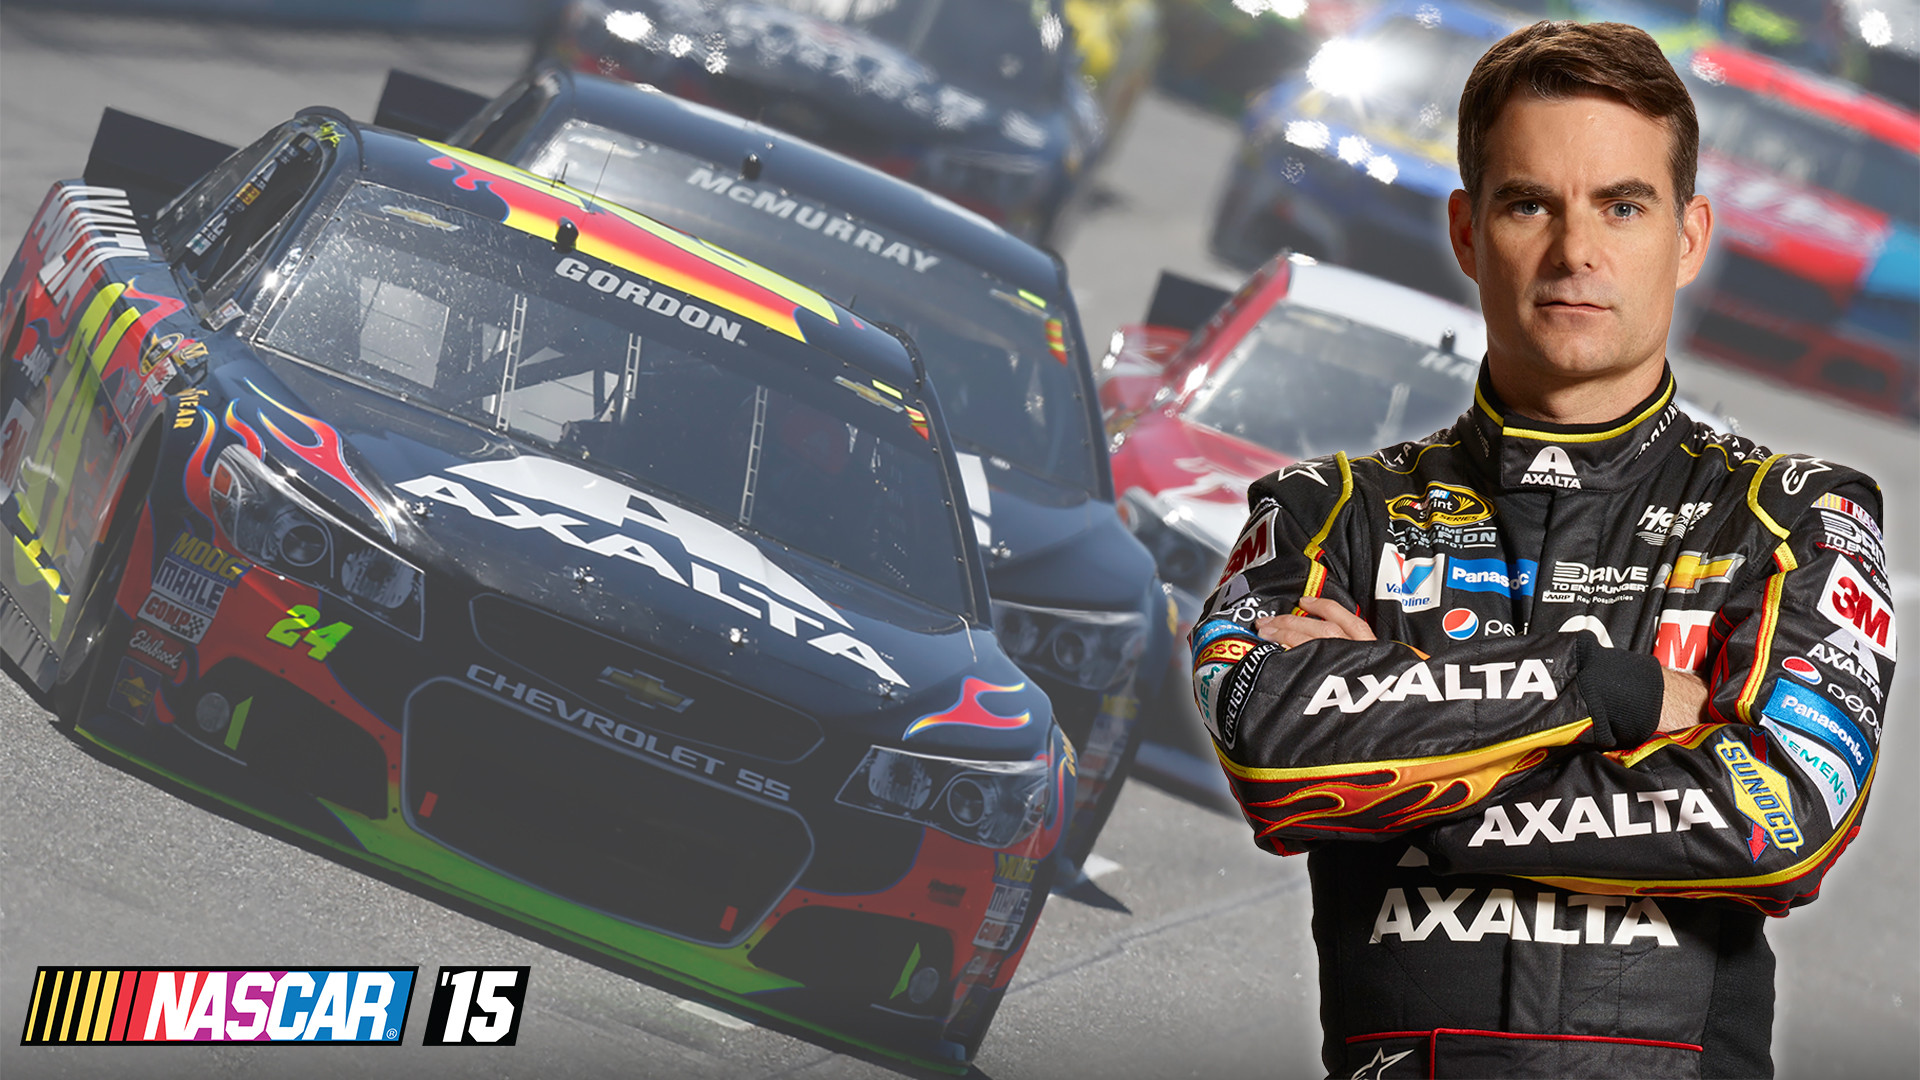 1920x1080 Why Is Nascar 15 Game Wallpapers So Famous? | Nascar 15 Game Wallpapers